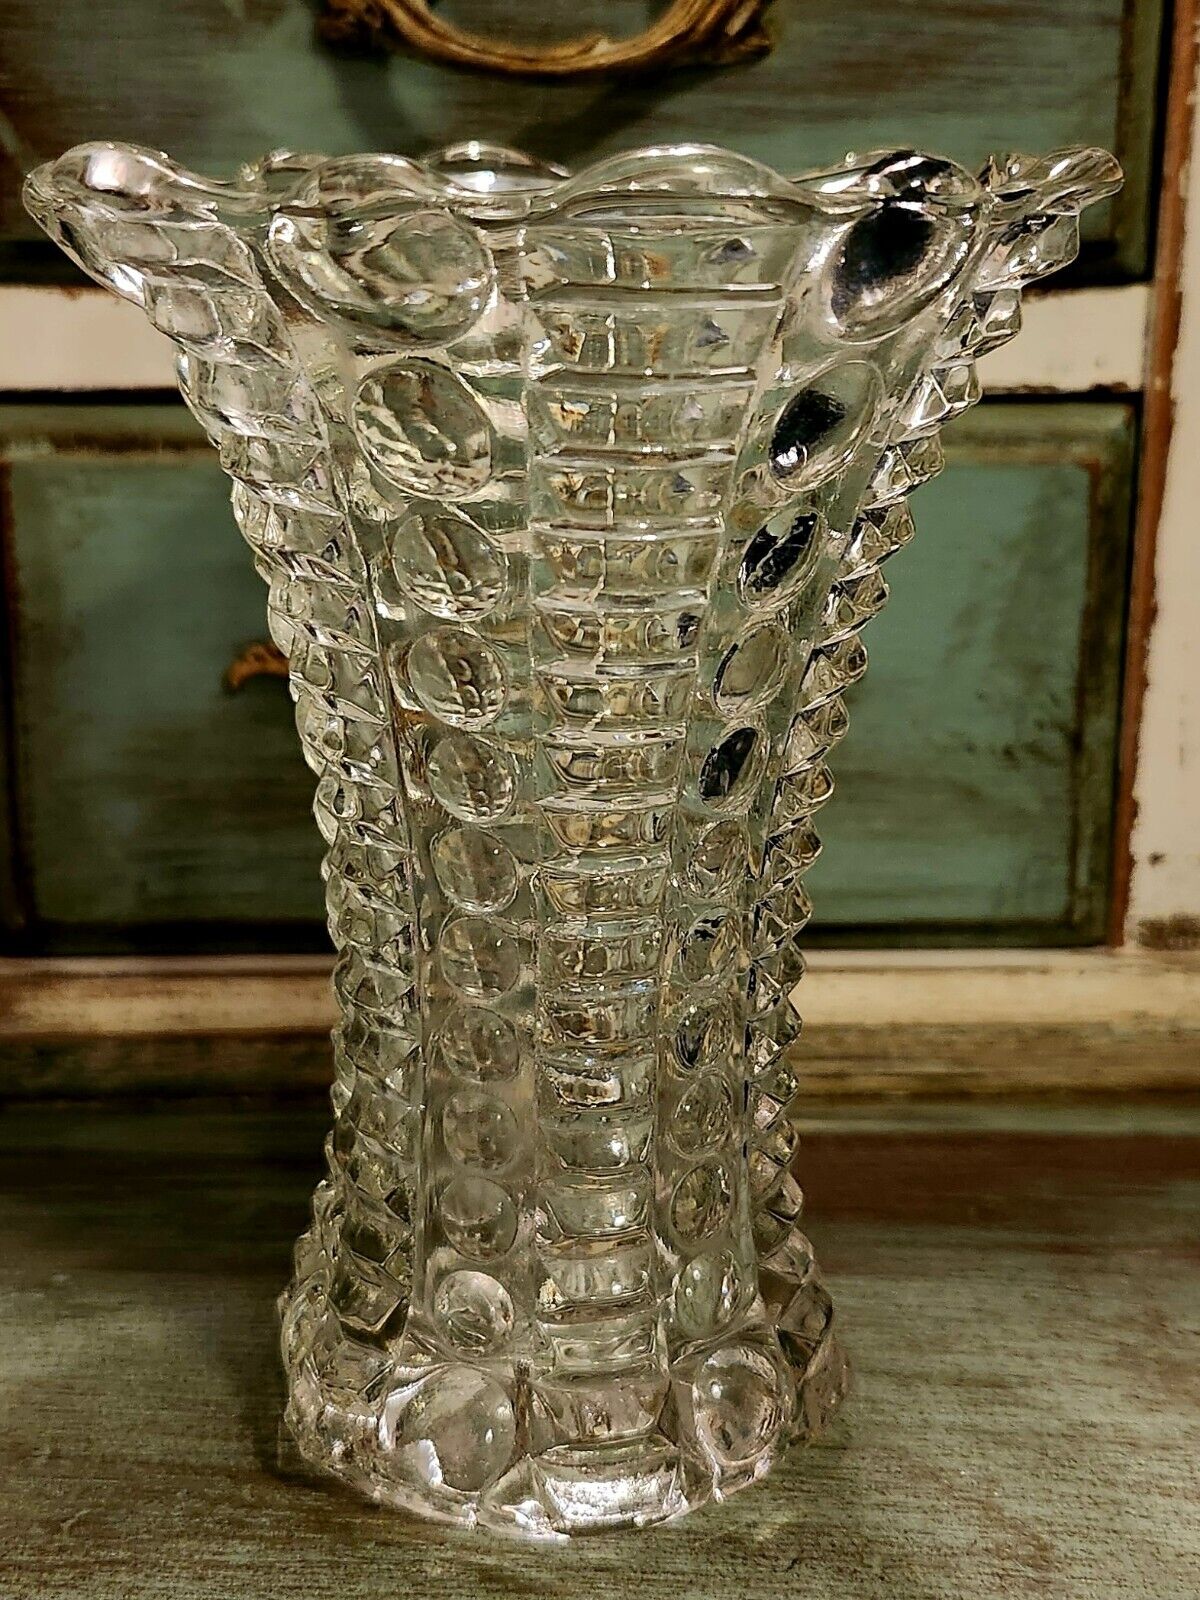 Clear Indiana Glass Vtg Mini Bud Vase Bubbled With Beaded Edges 5” 1940s?